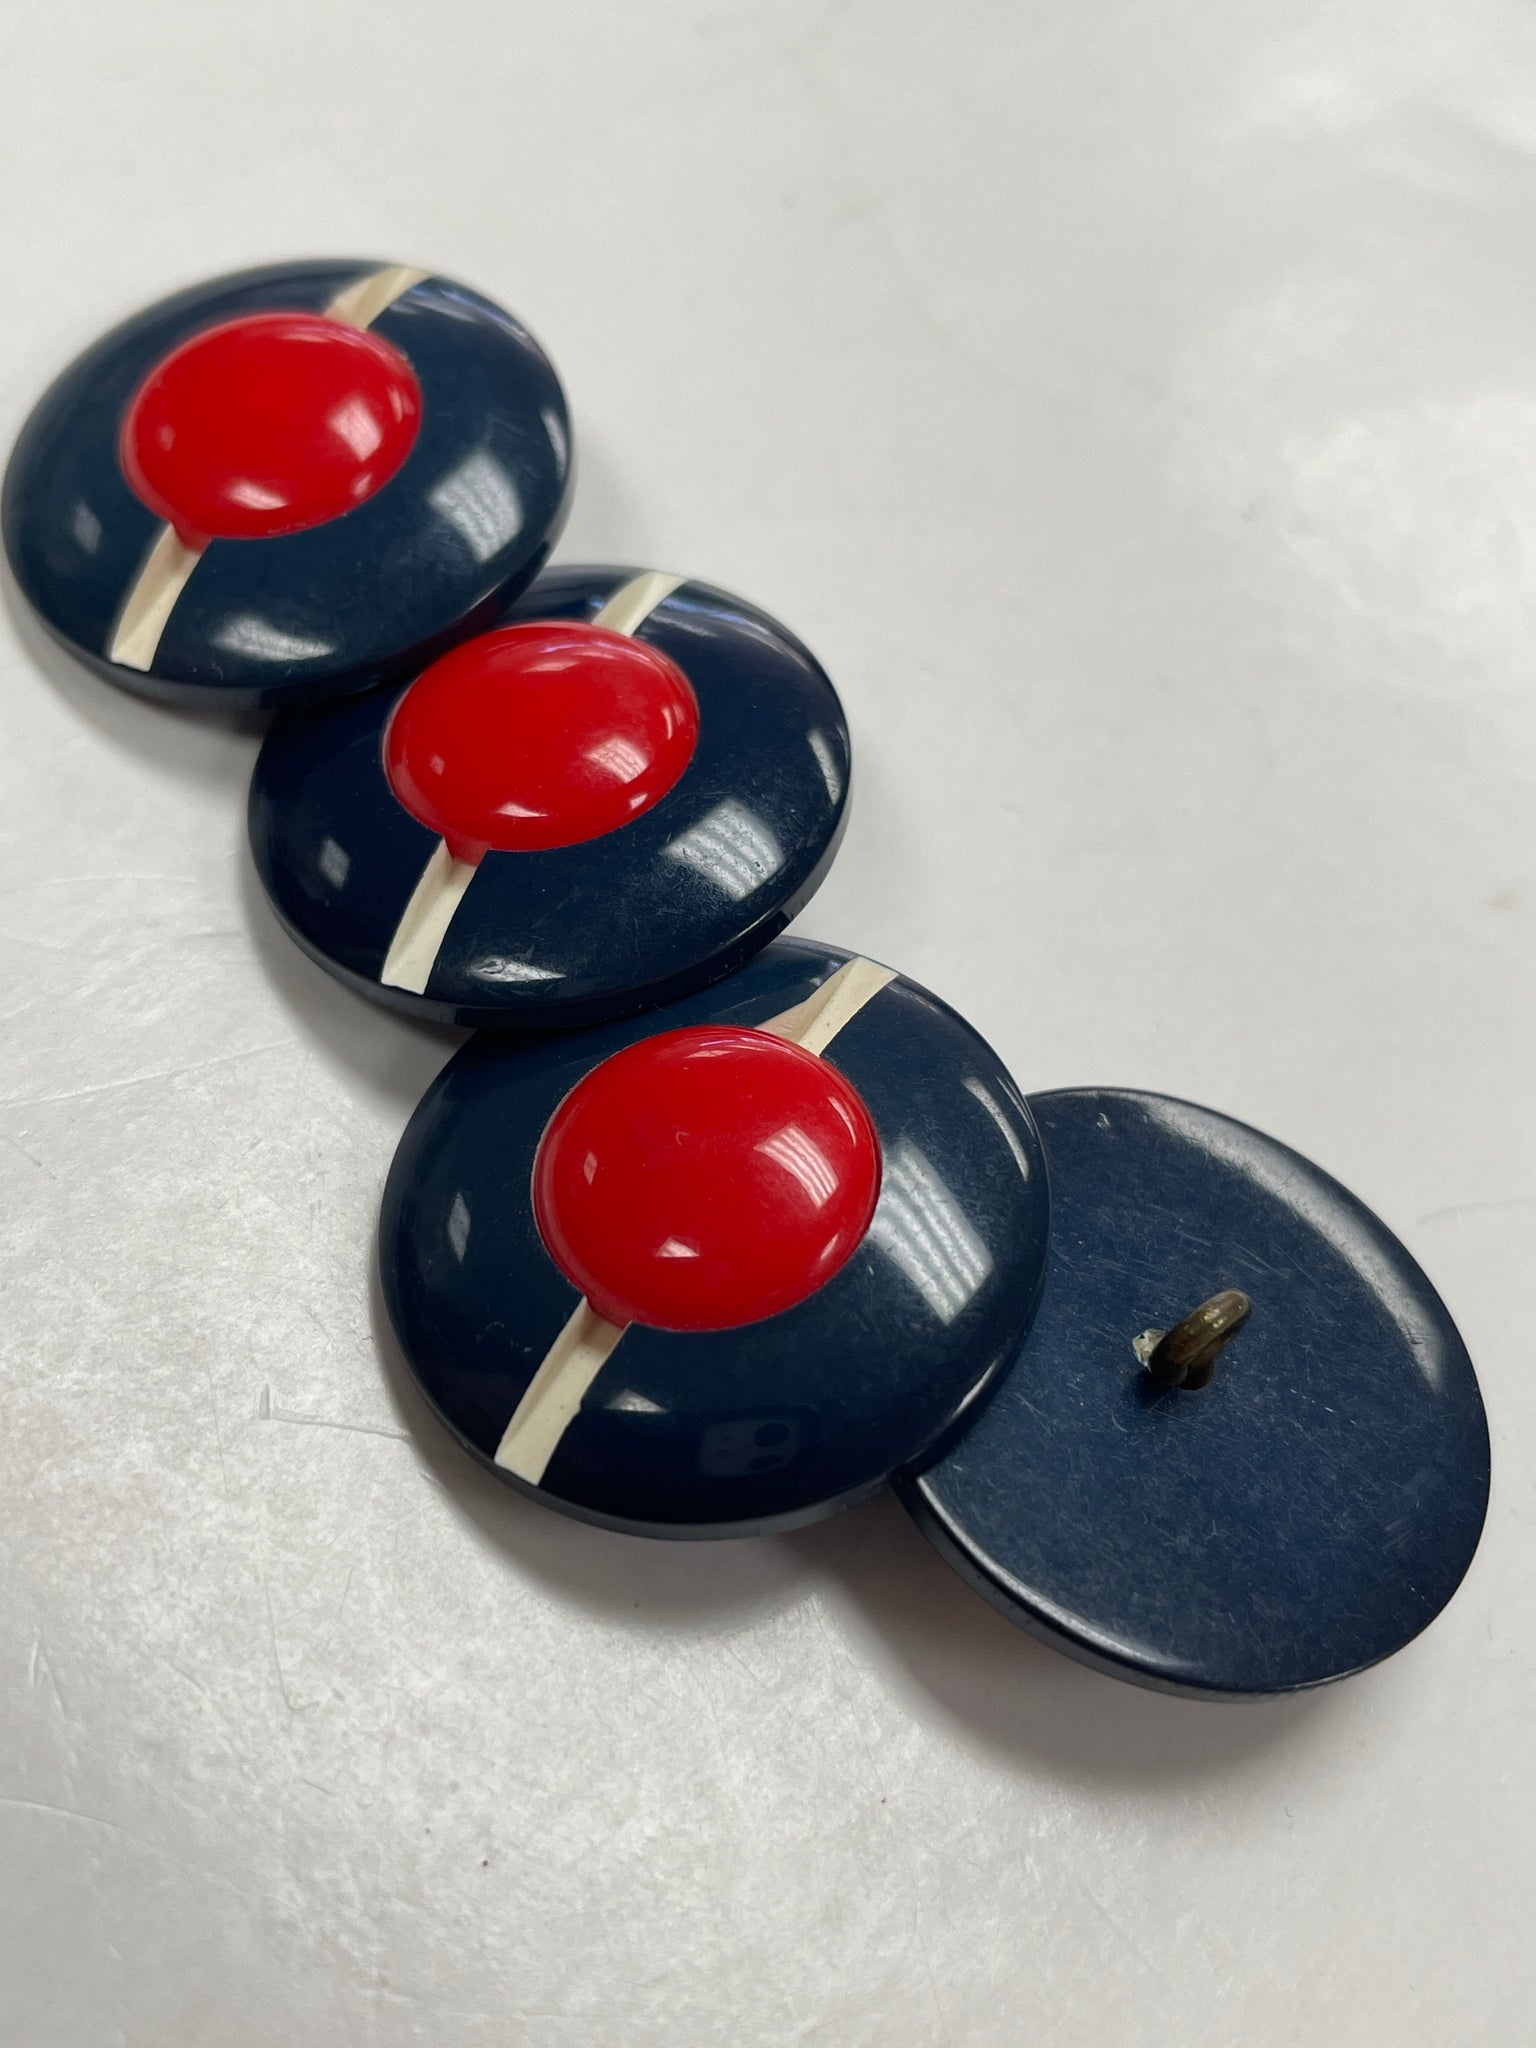 Button Set of 4 Plastic Vintage 1 1/4" - Navy Blue with Red Center